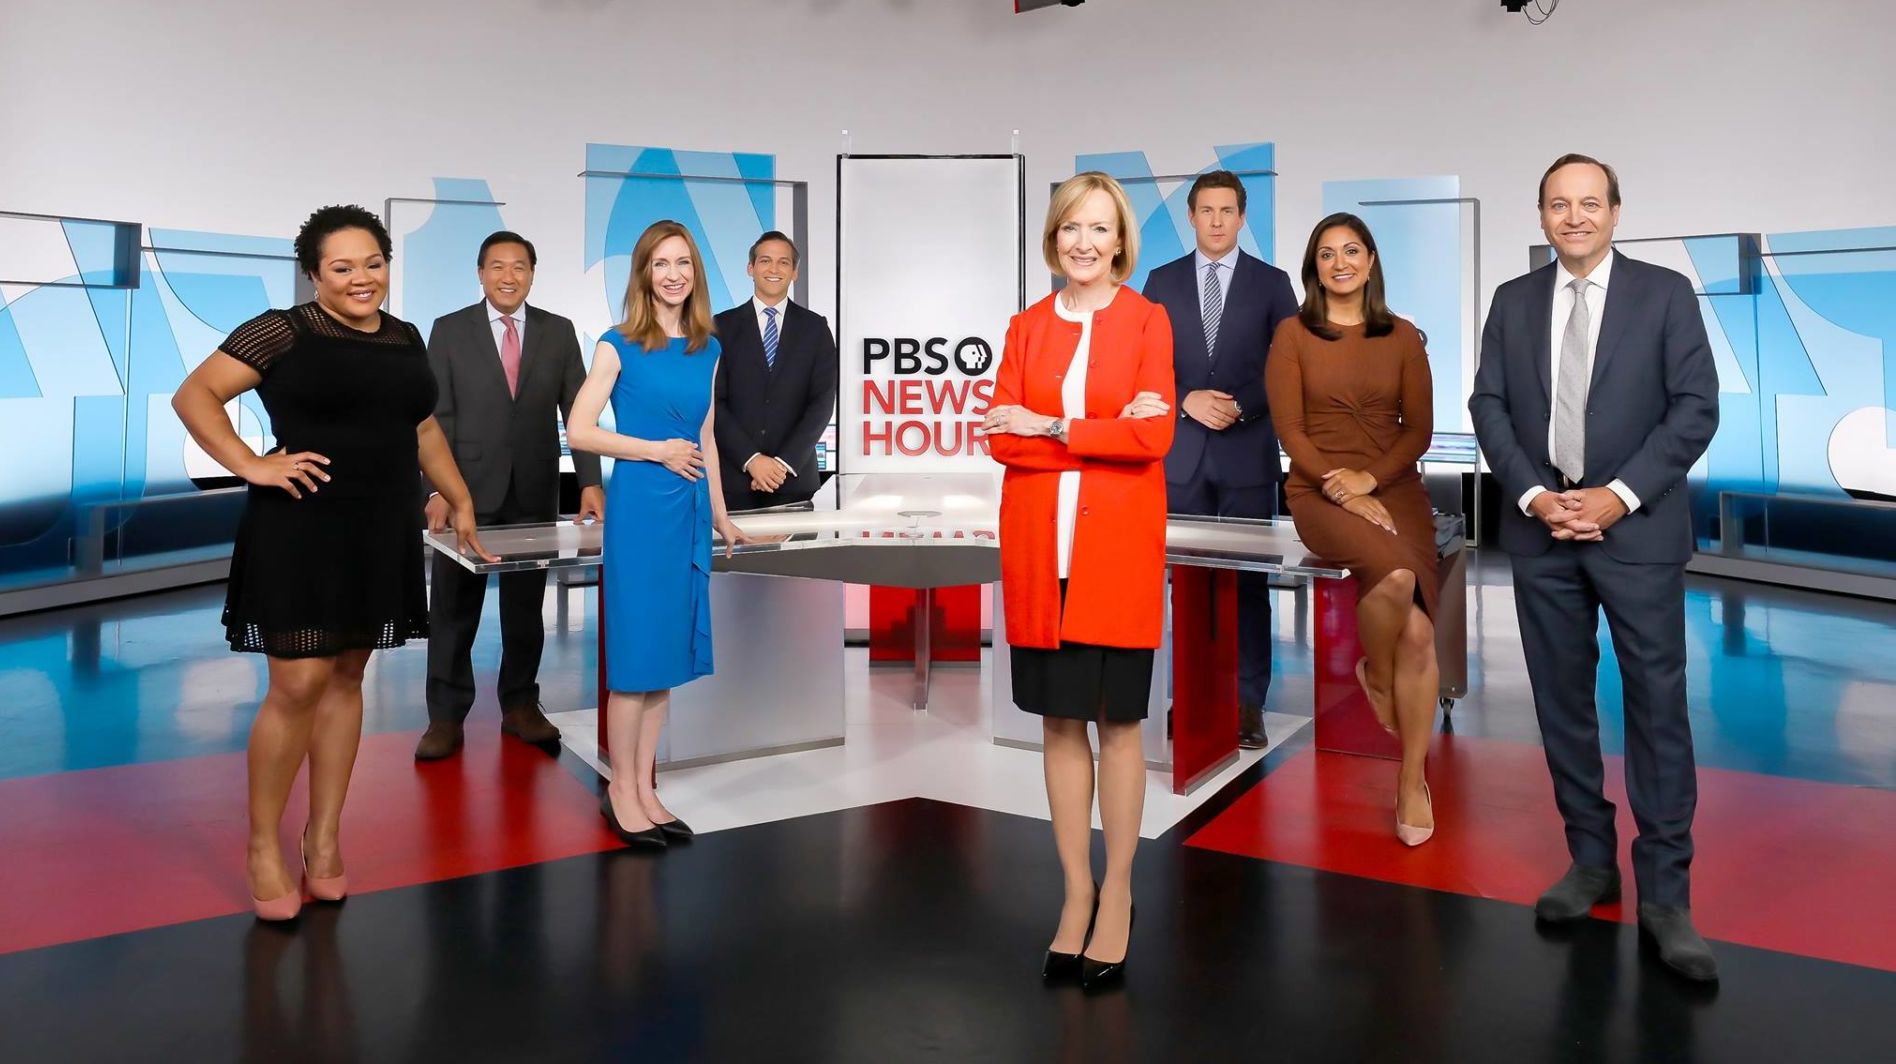 In a glossy TV studio, men and women in business pull spread out and pose for a publicity photo.  In the enter, an older woman in bright red jacket and black skirt folds her arms.